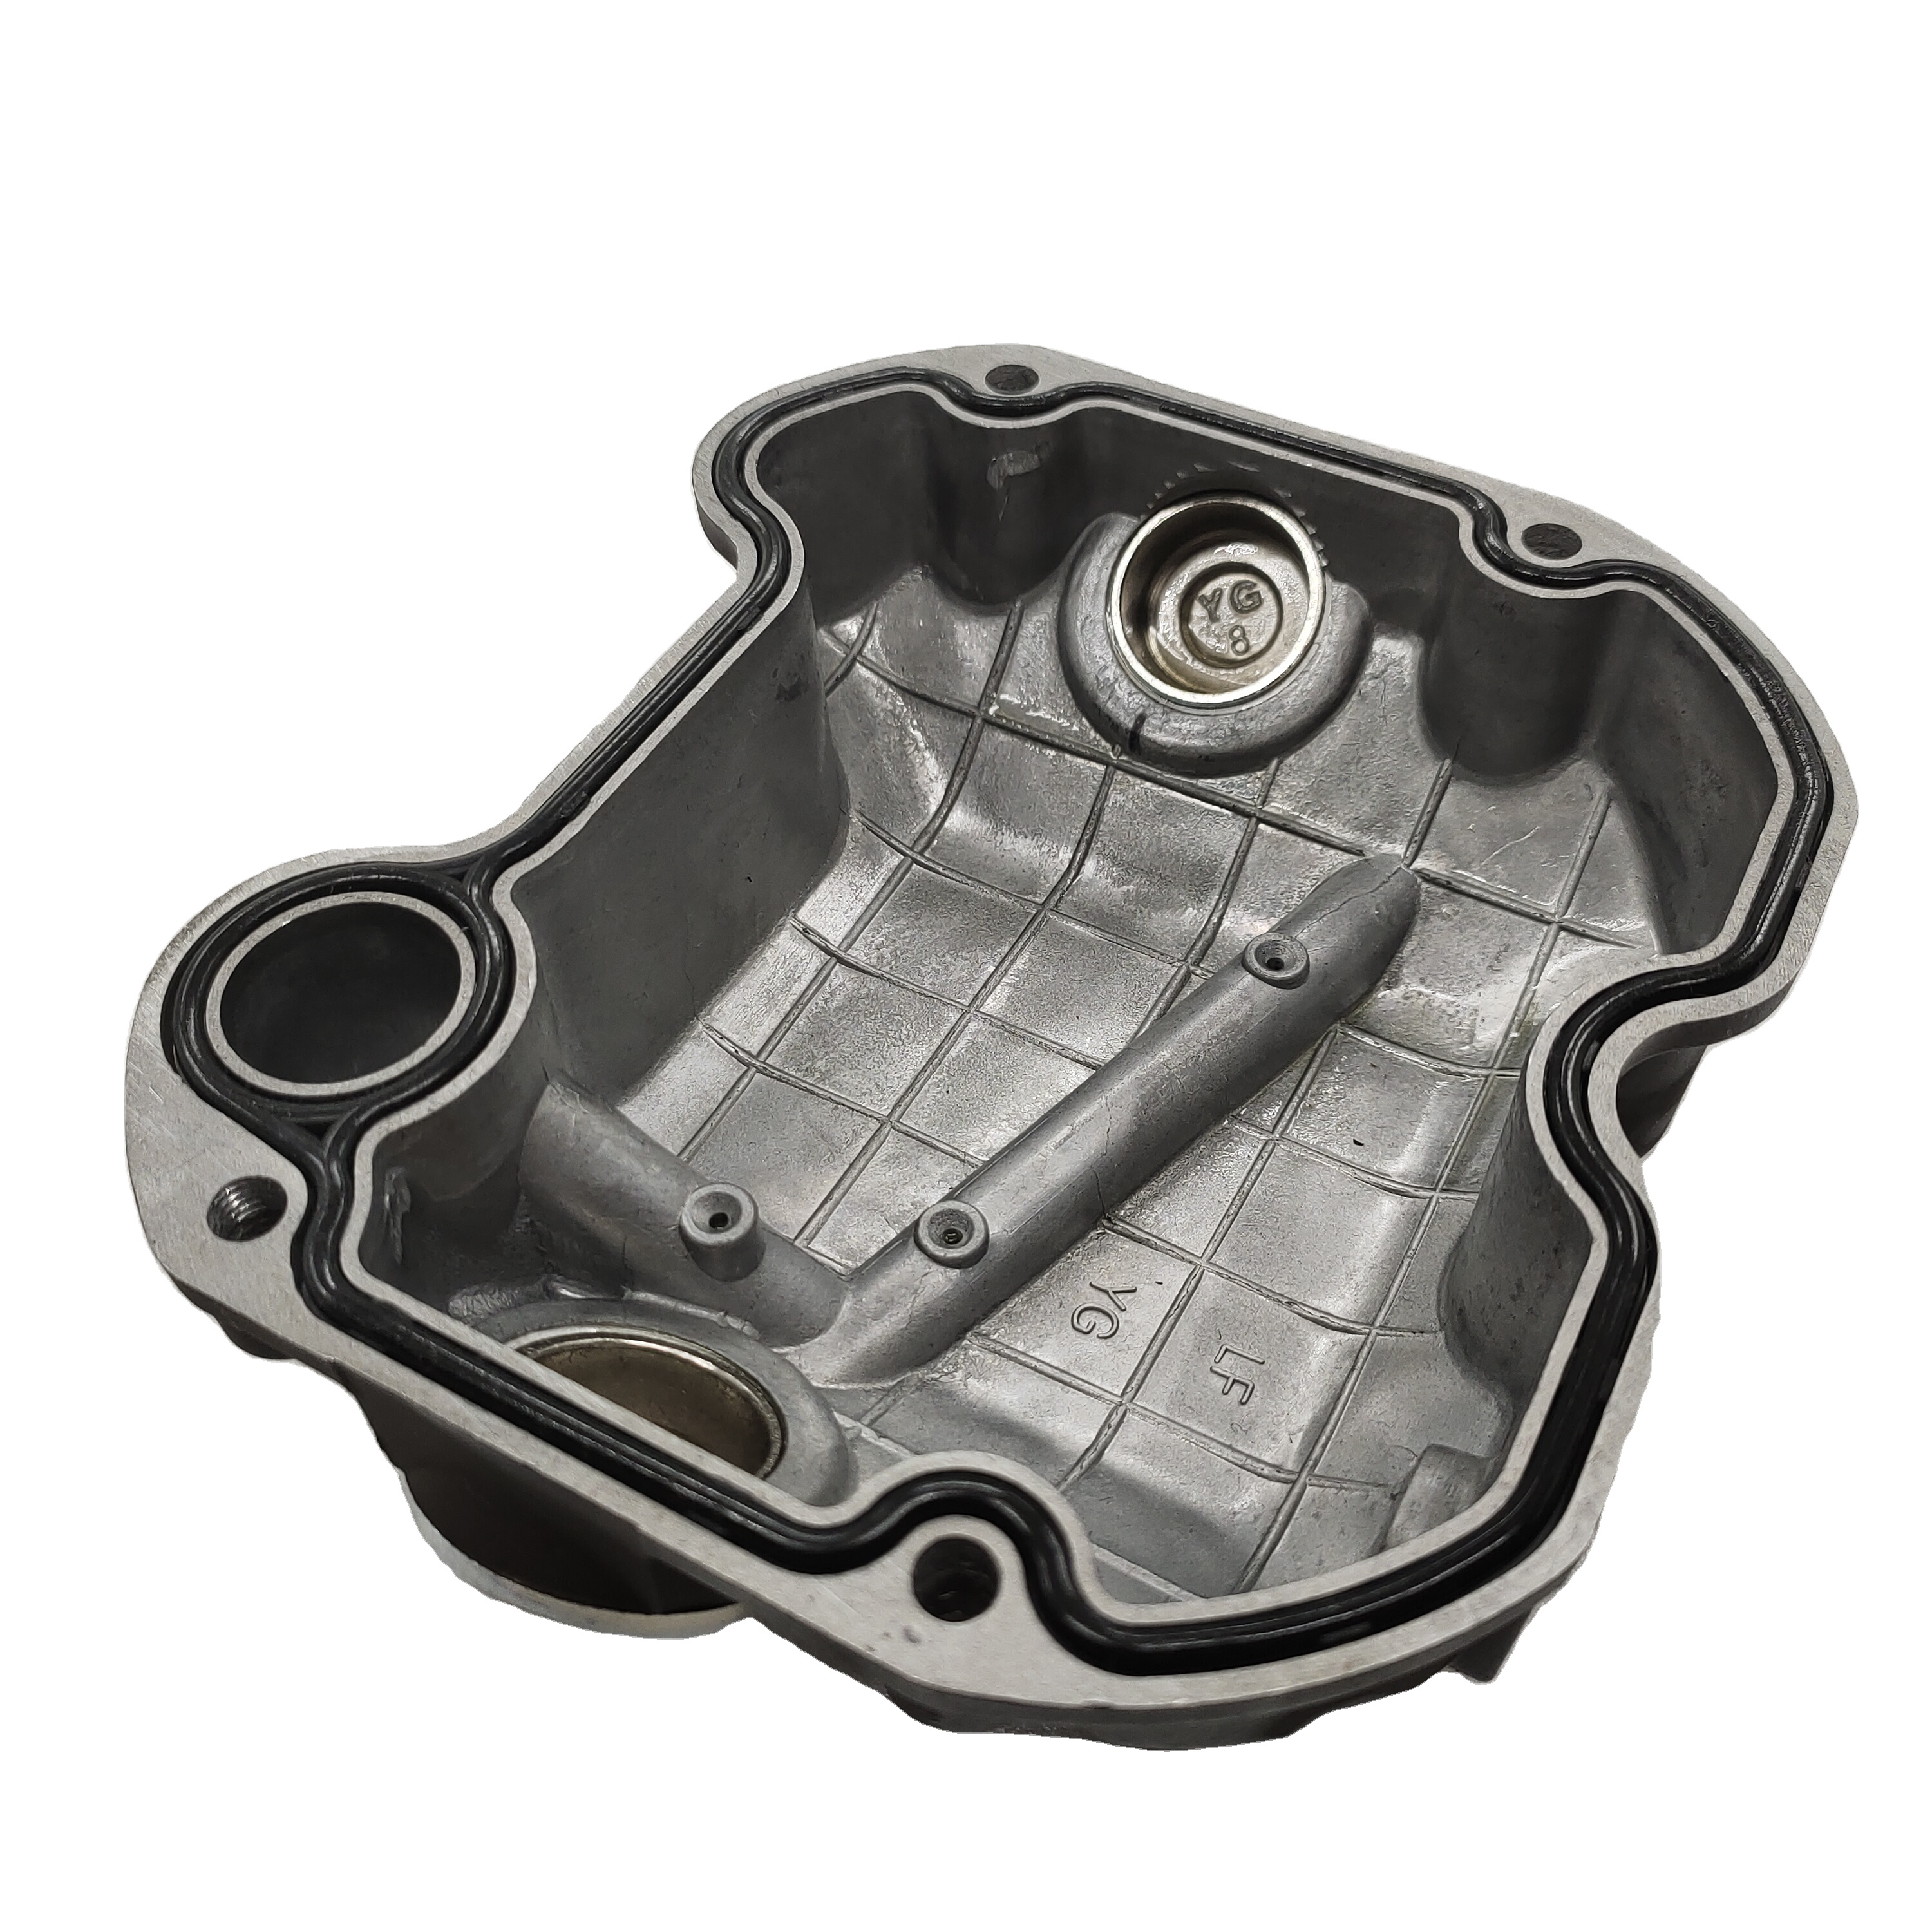 High quality Motorcycle Tricycle LIFAN 250cc water-cooled Type Engine assembly  engine cylinder cover for global market